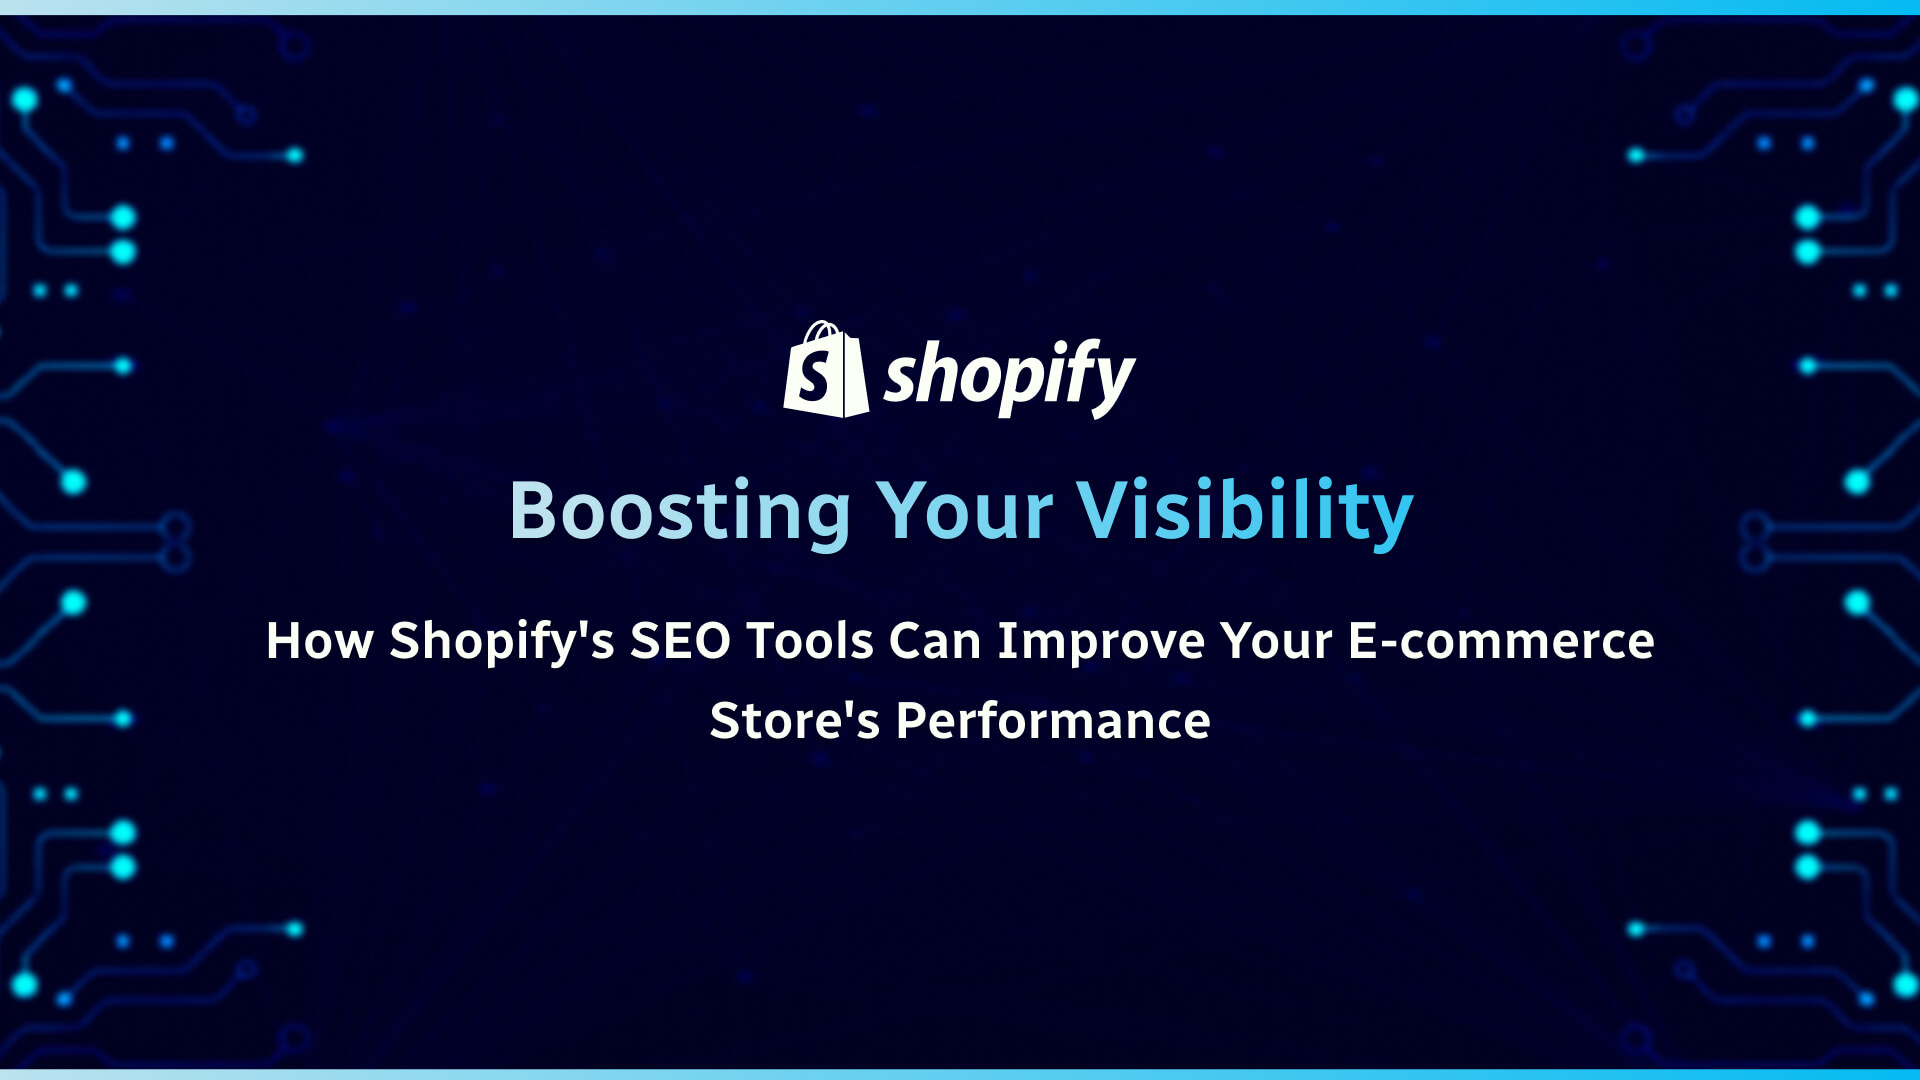 Boosting Your Visibility: How Shopify’s SEO Tools Can Improve Your E-commerce Store’s Performance